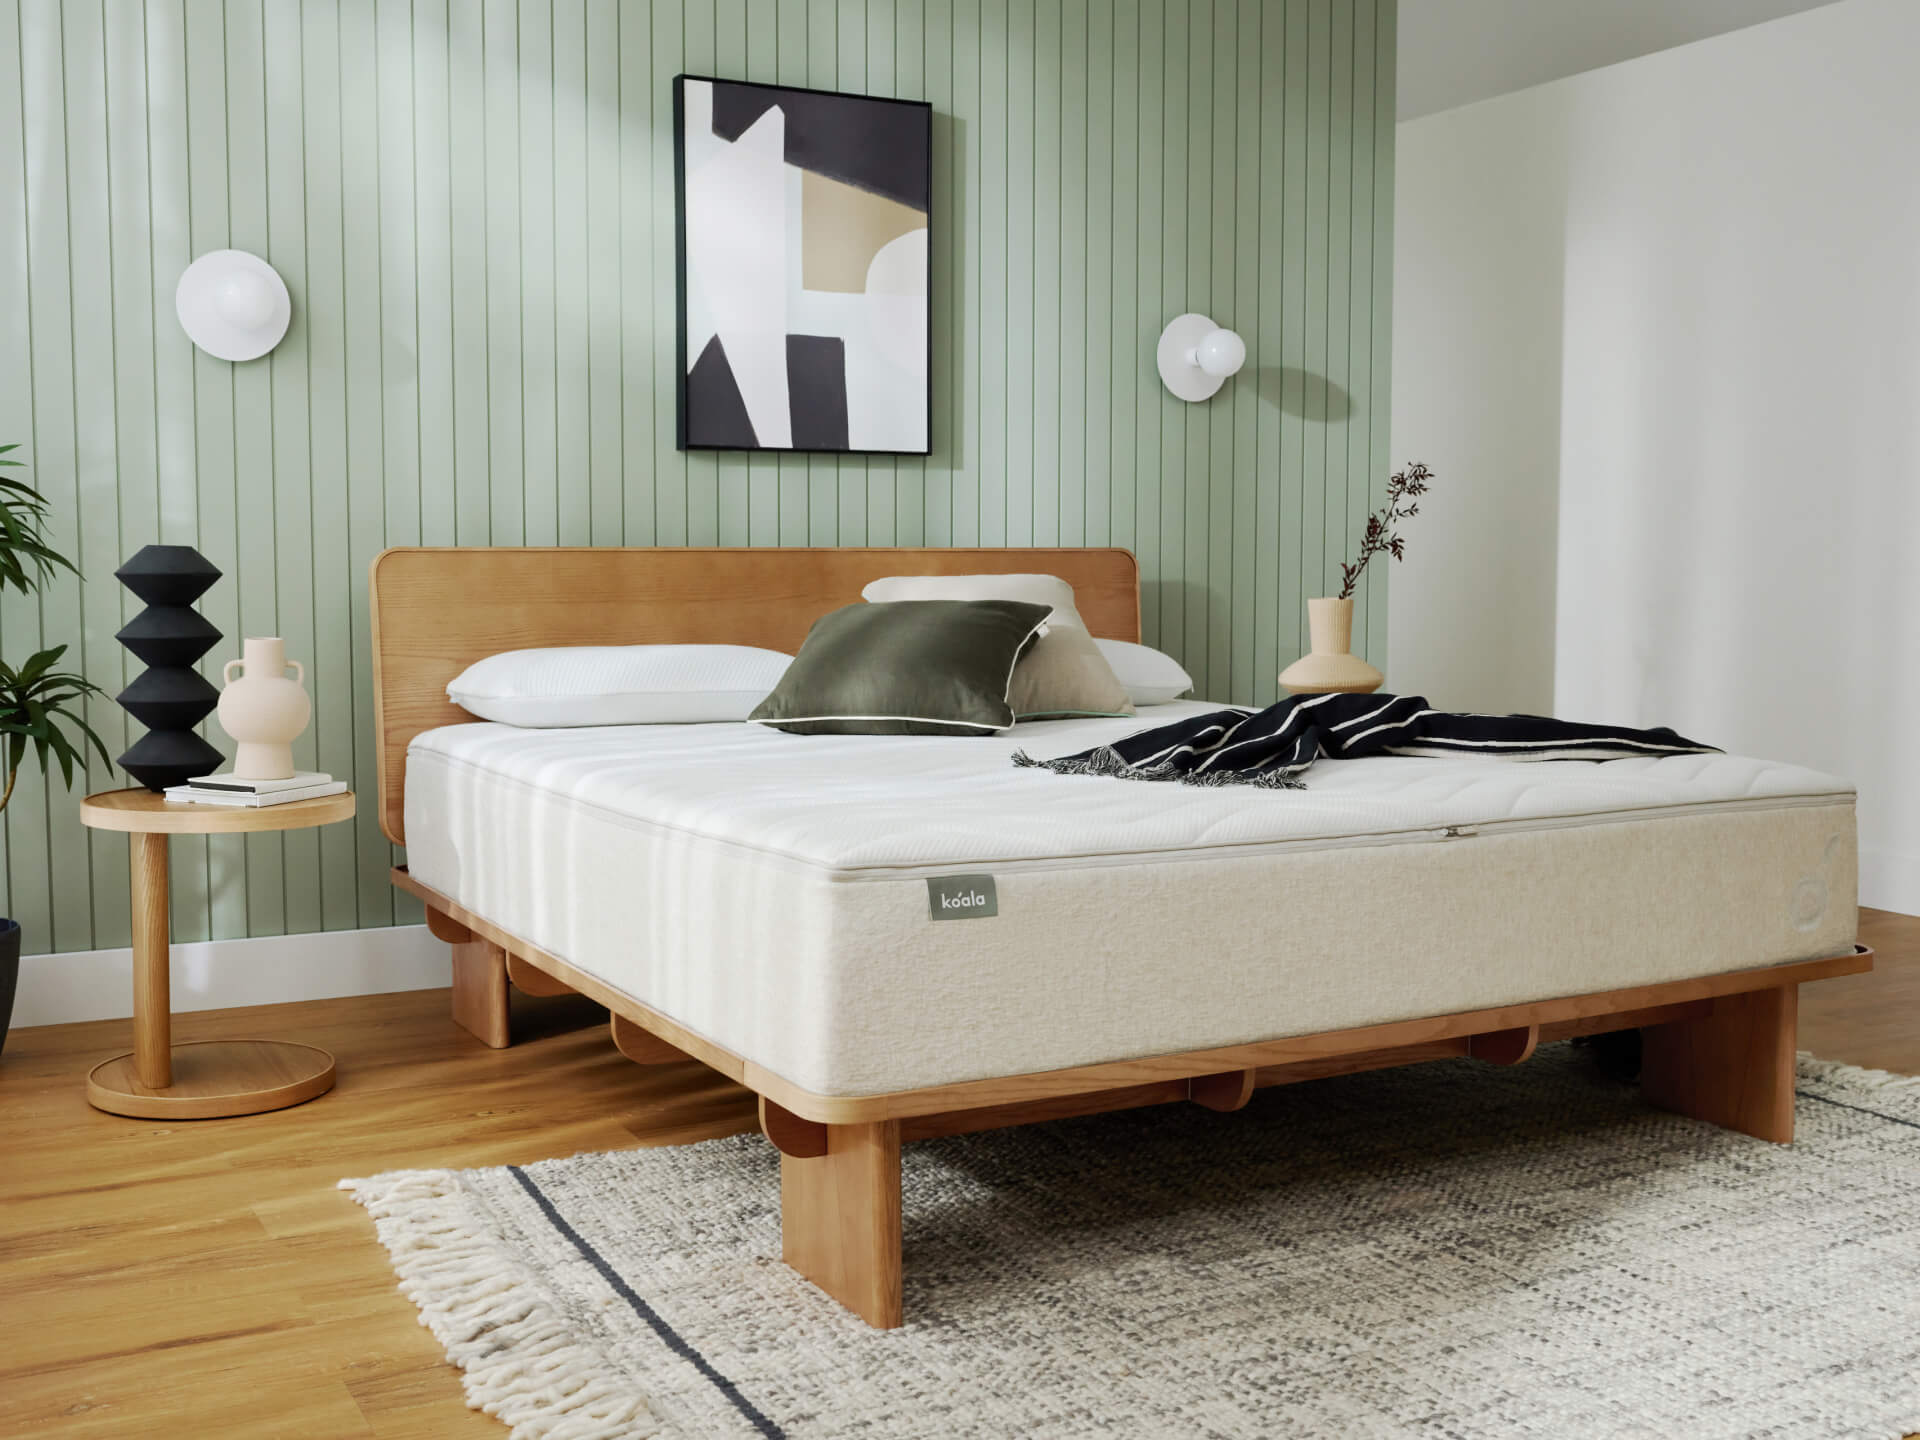 A Koala mattress sits on the Kirribilli bed base in a contemporary-styled bedroom.